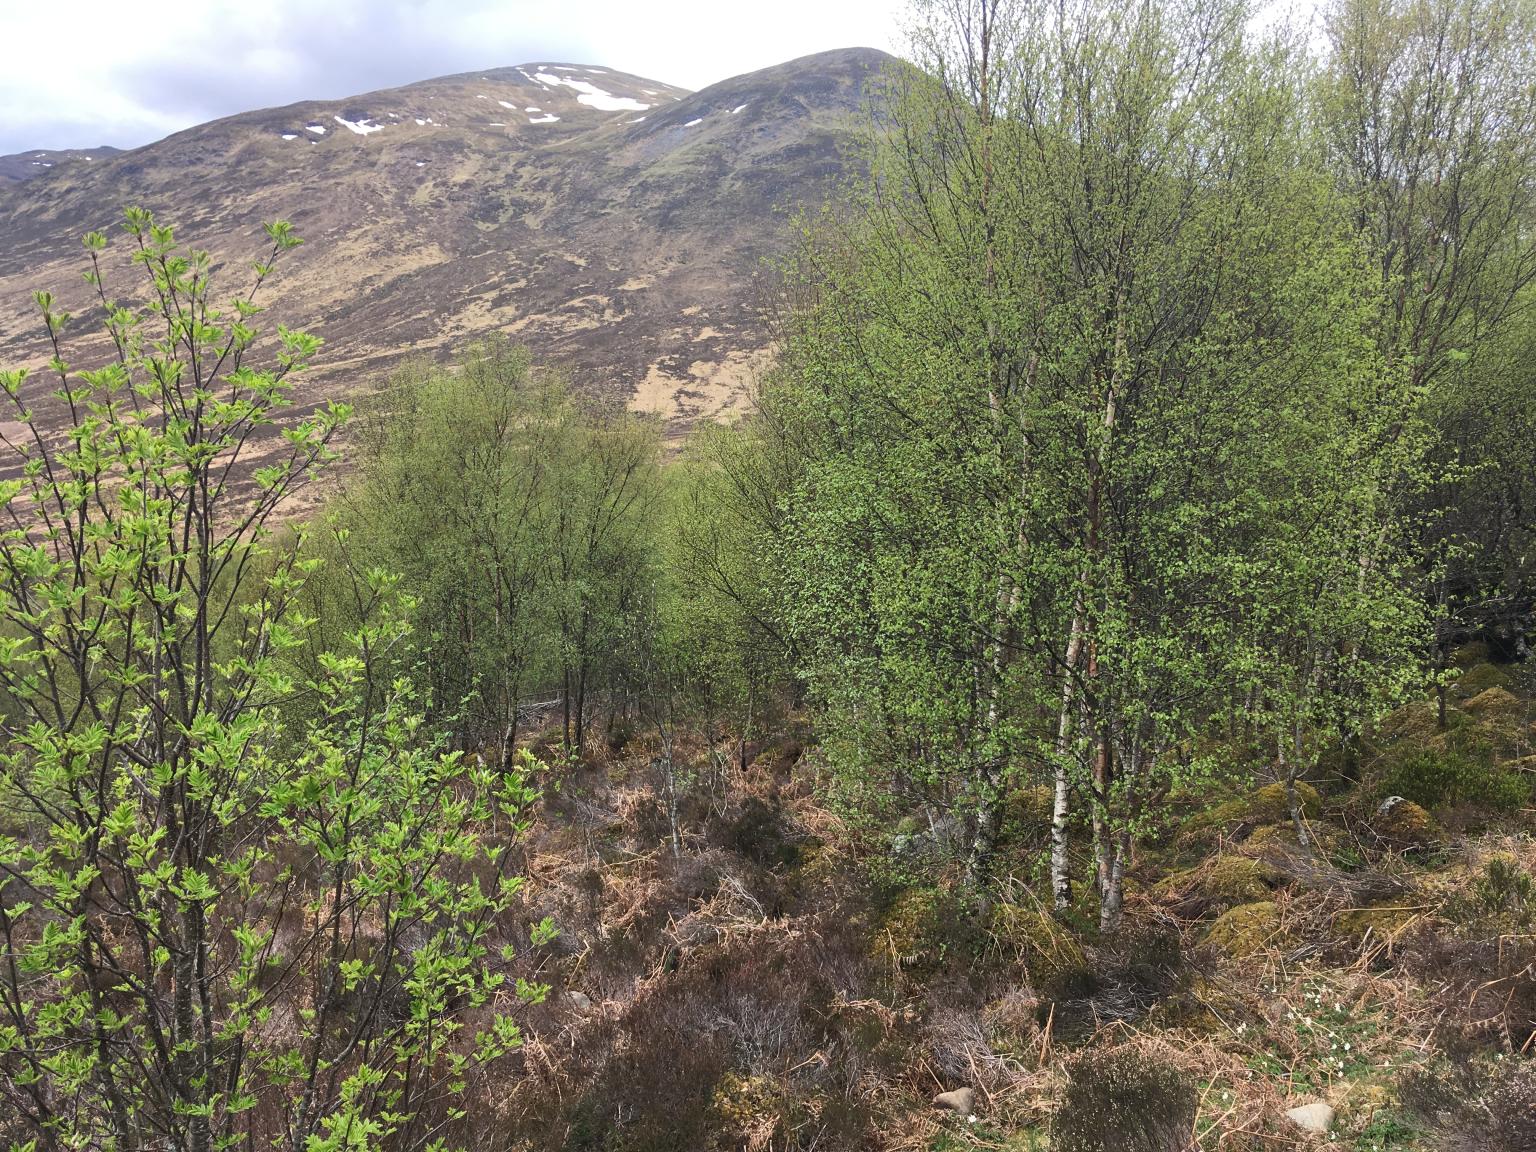 Natural regeneration of trees following reduction in grazing at Creag Meagaidh National Nature Reserve  Picture: Mike Morecroft